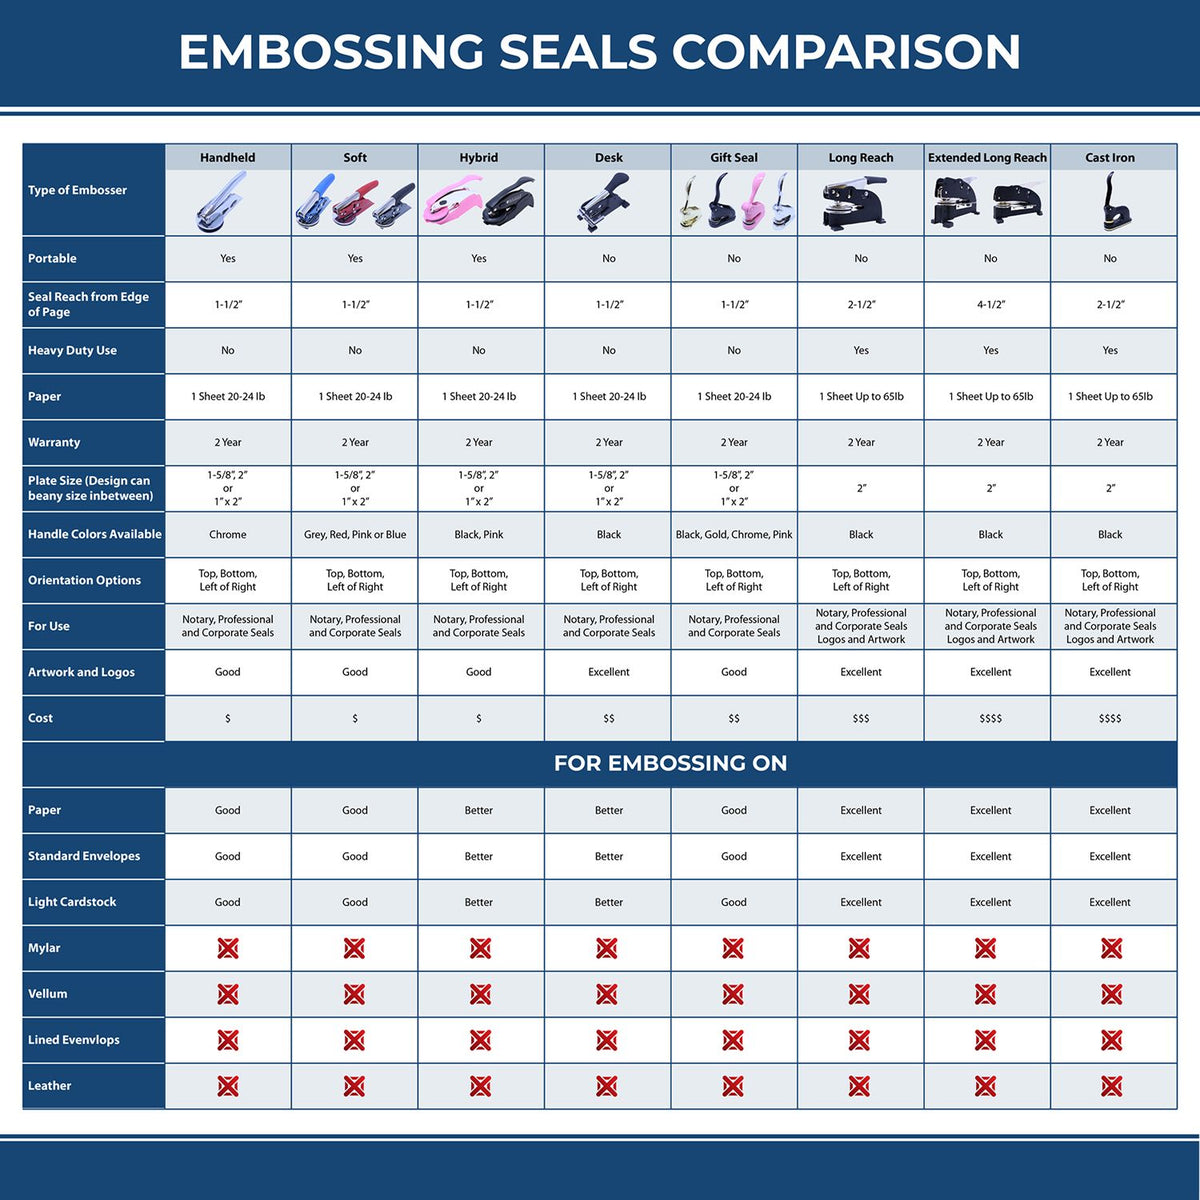 A comparison chart for the different types of mount models available for the Heavy Duty Cast Iron New Jersey Engineer Seal Embosser.